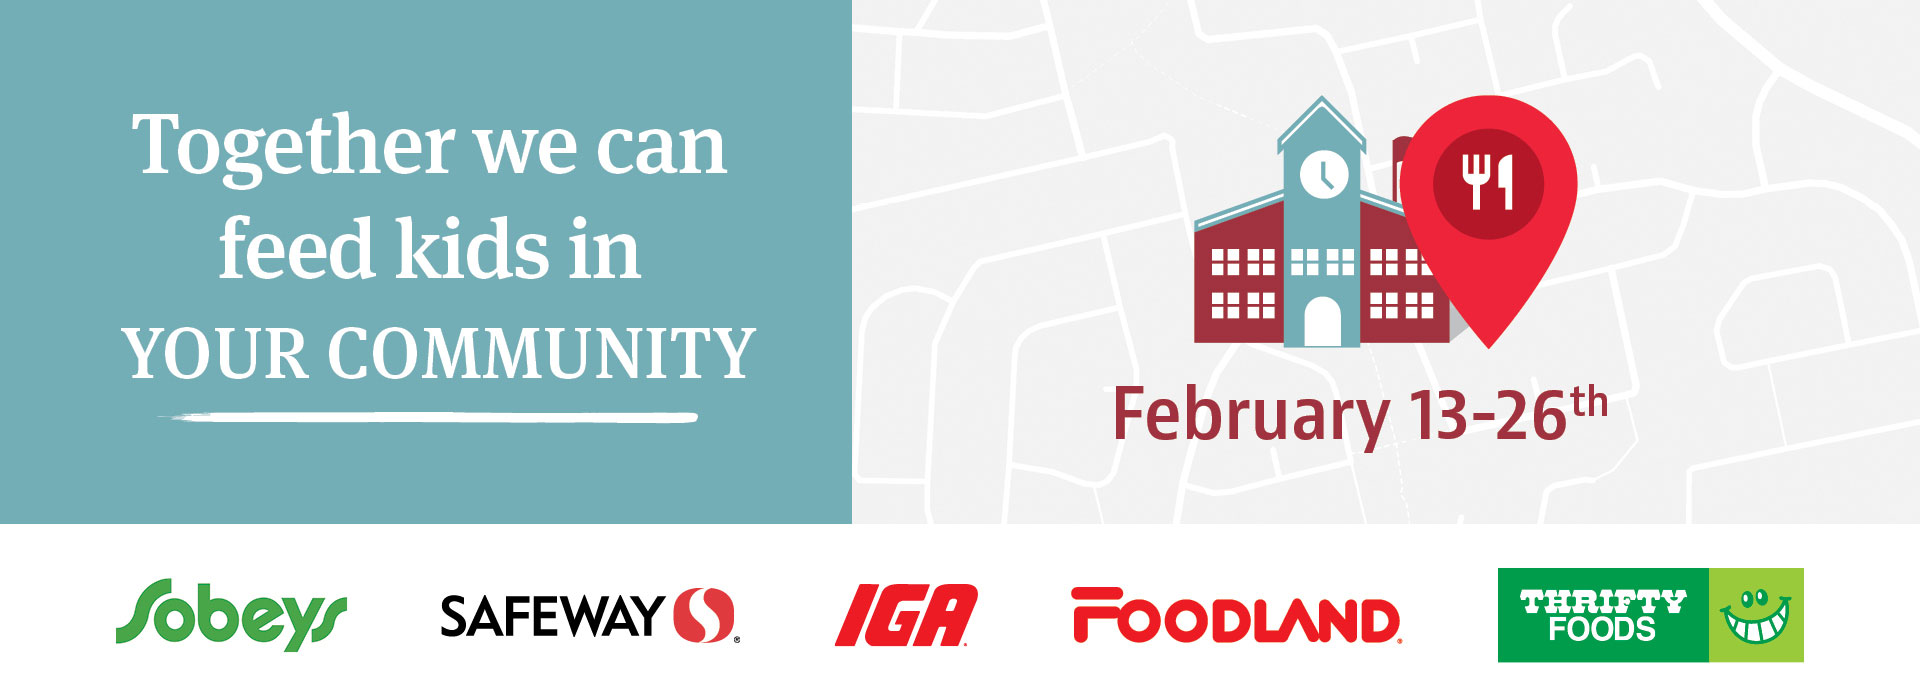 Together we can feed kids in your community, from February 13 to 26. Presented by Sobeys, Safeway, IGA, Foodland and Thrifty Foods